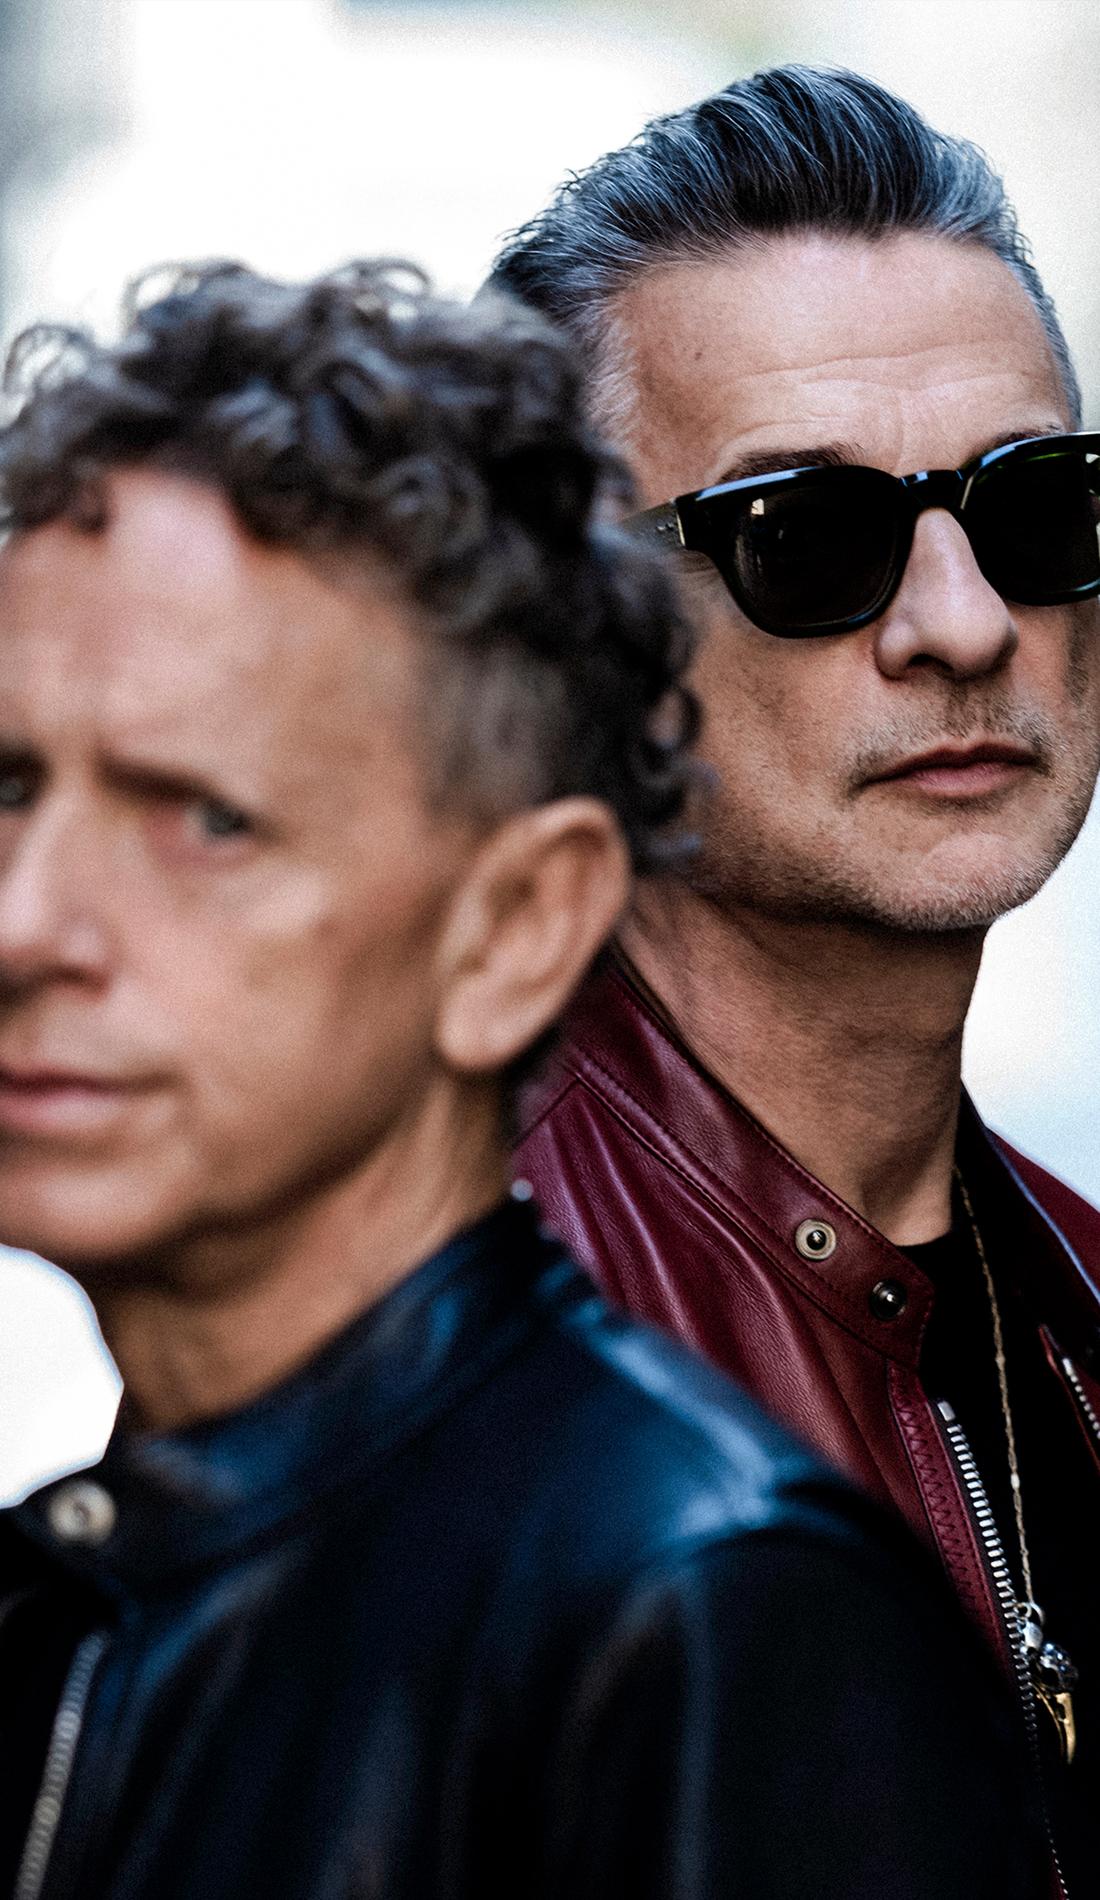 Depeche Mode coming to Rocket Mortgage Fieldhouse this fall